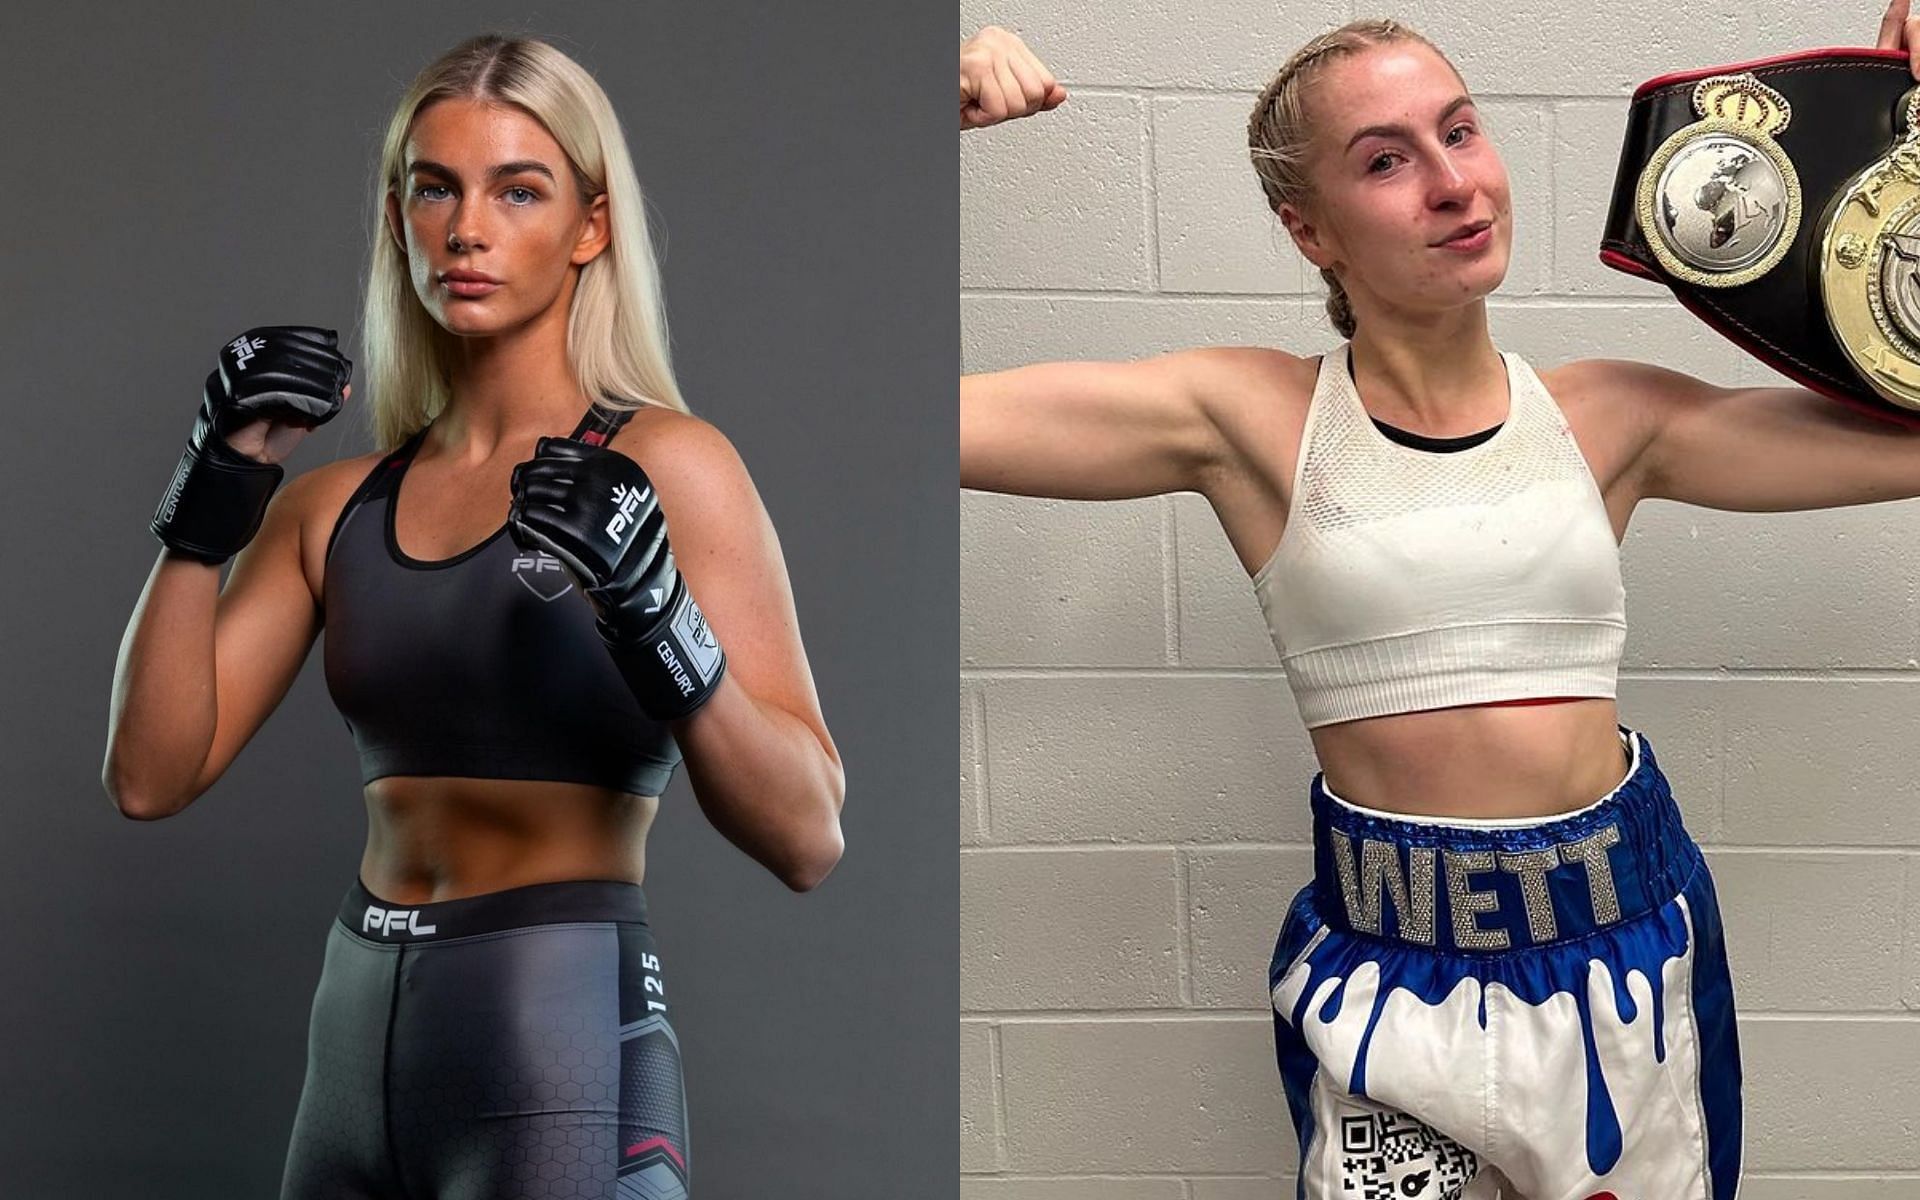 Sammy-Jo Luxton responds after fan points out her opponent resembles Astrid Wett